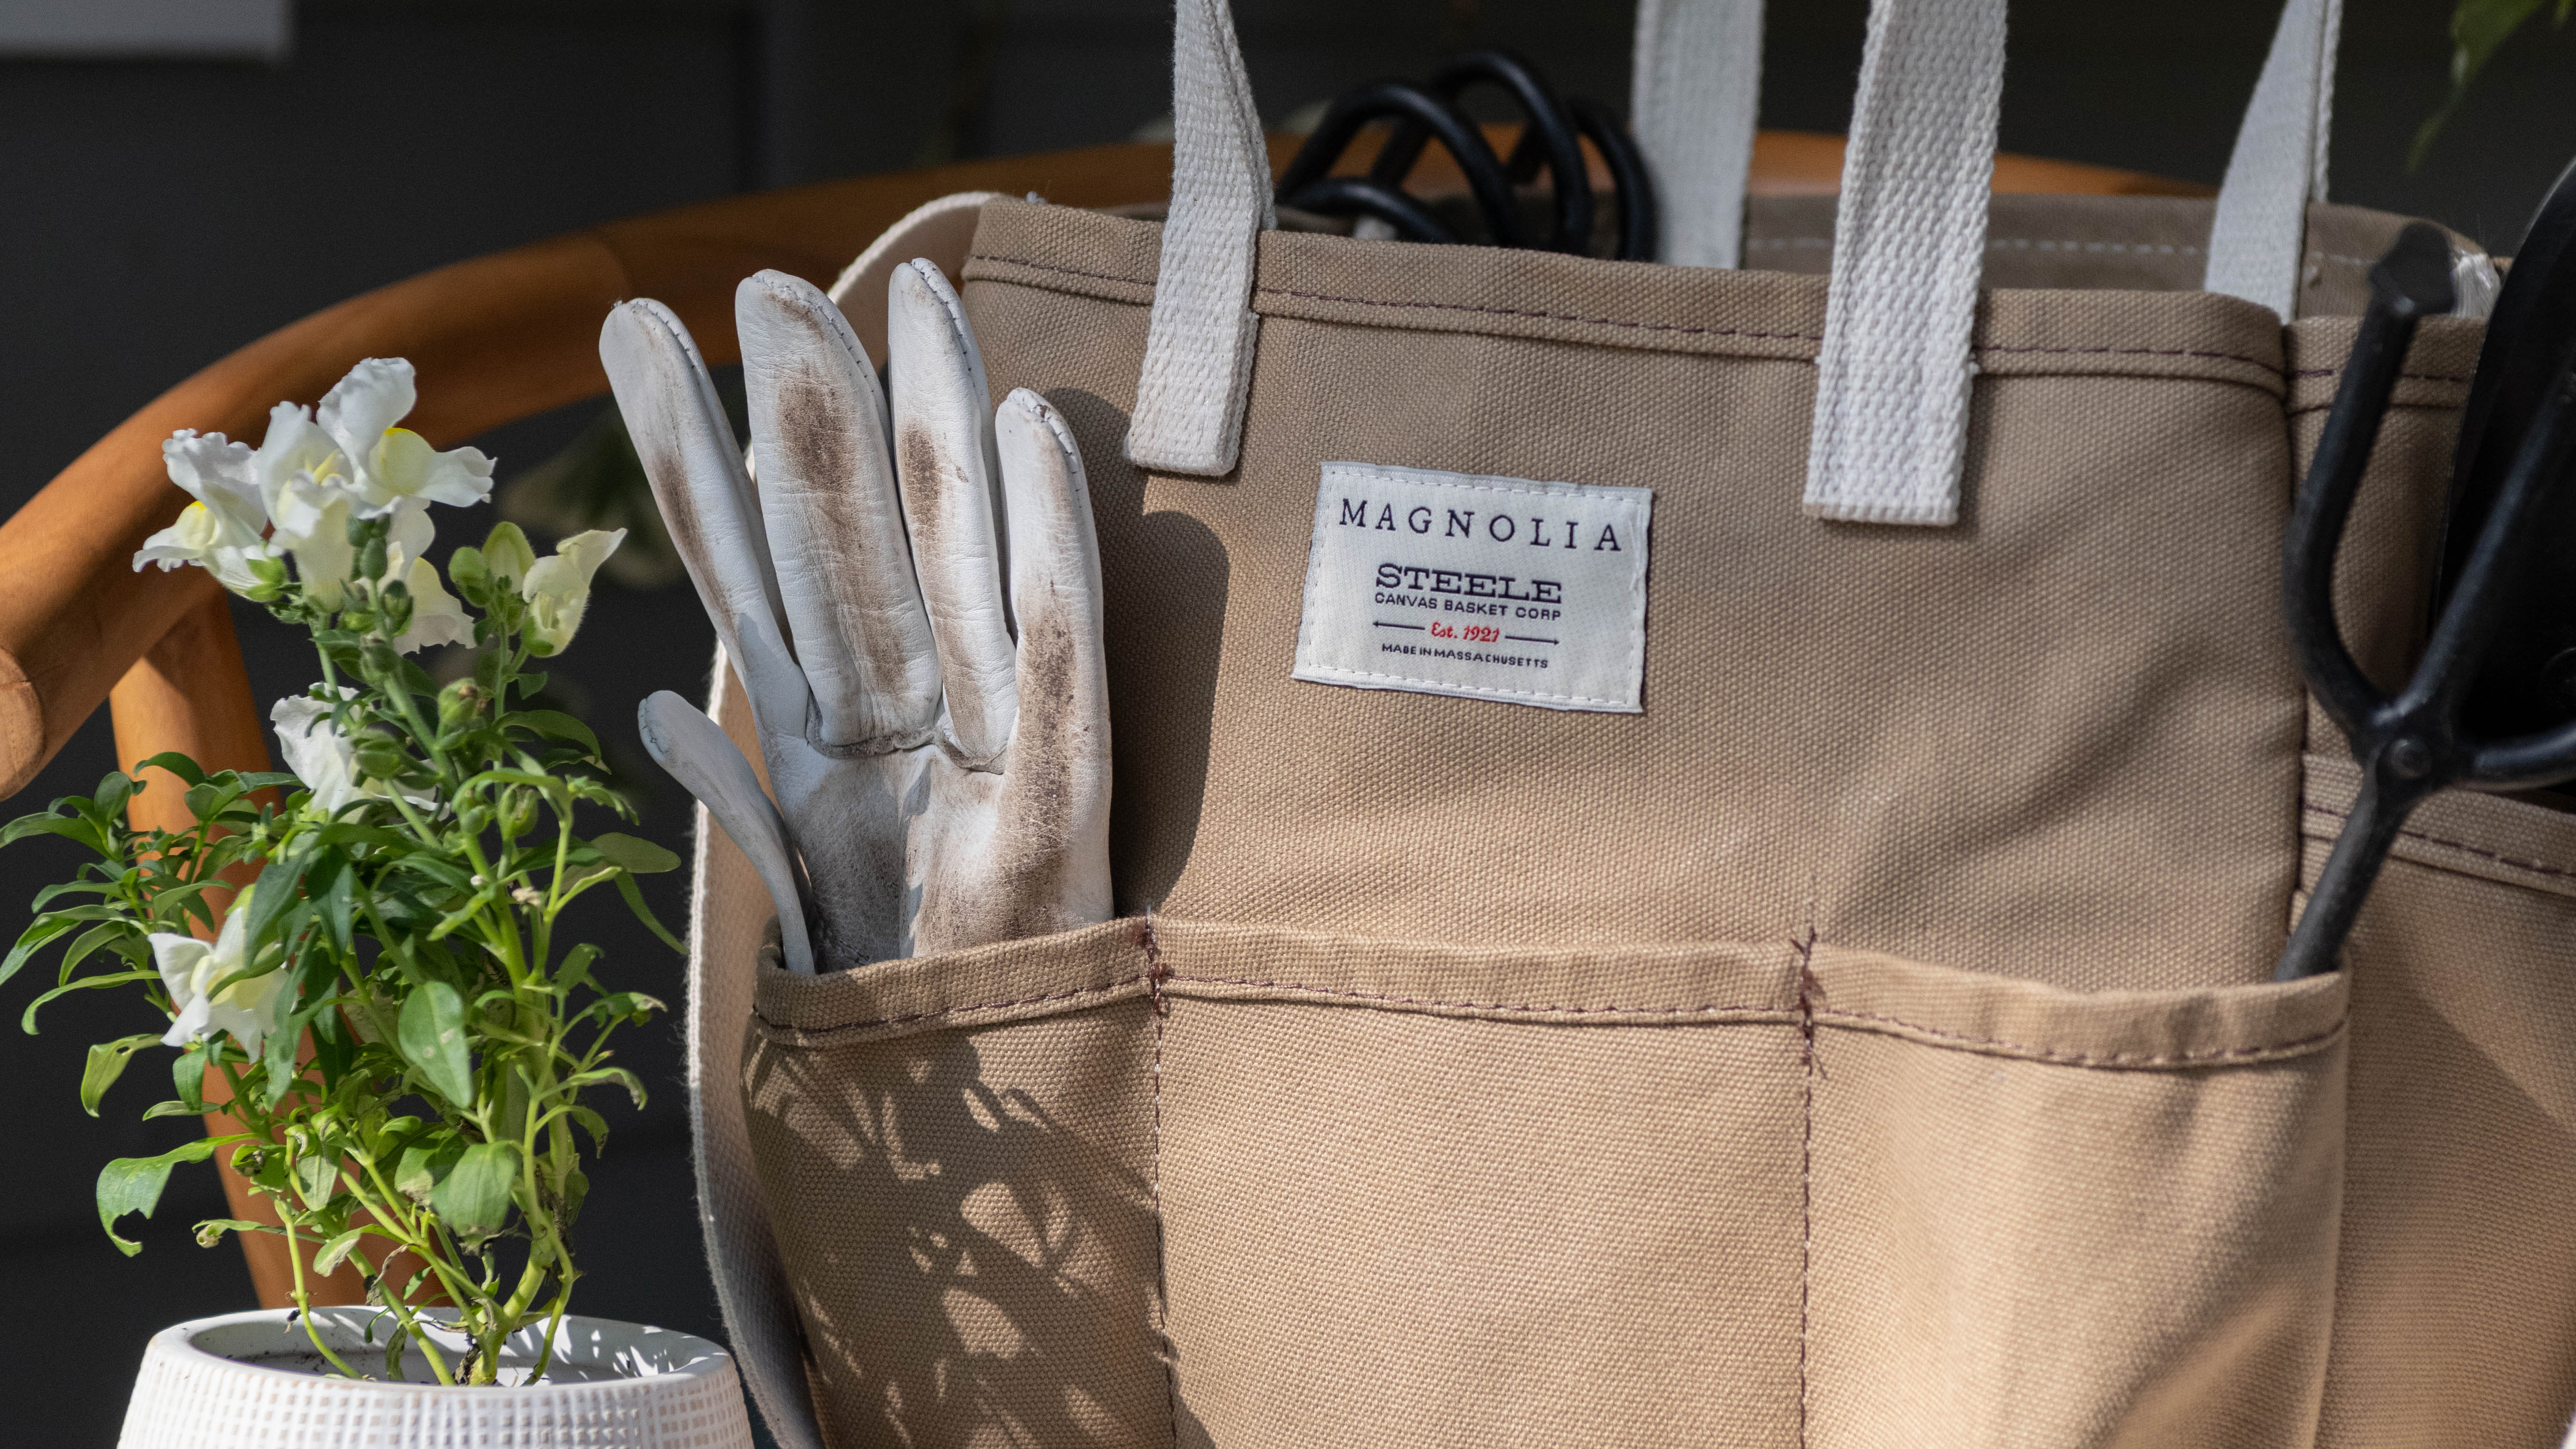 IN FULL FLOURISH  Gardening Tools + Planters  Afternoons in the garden, flowers by the basketful. Tend to the good you’ve got growing this season.   SHOP GARDEN HERE,